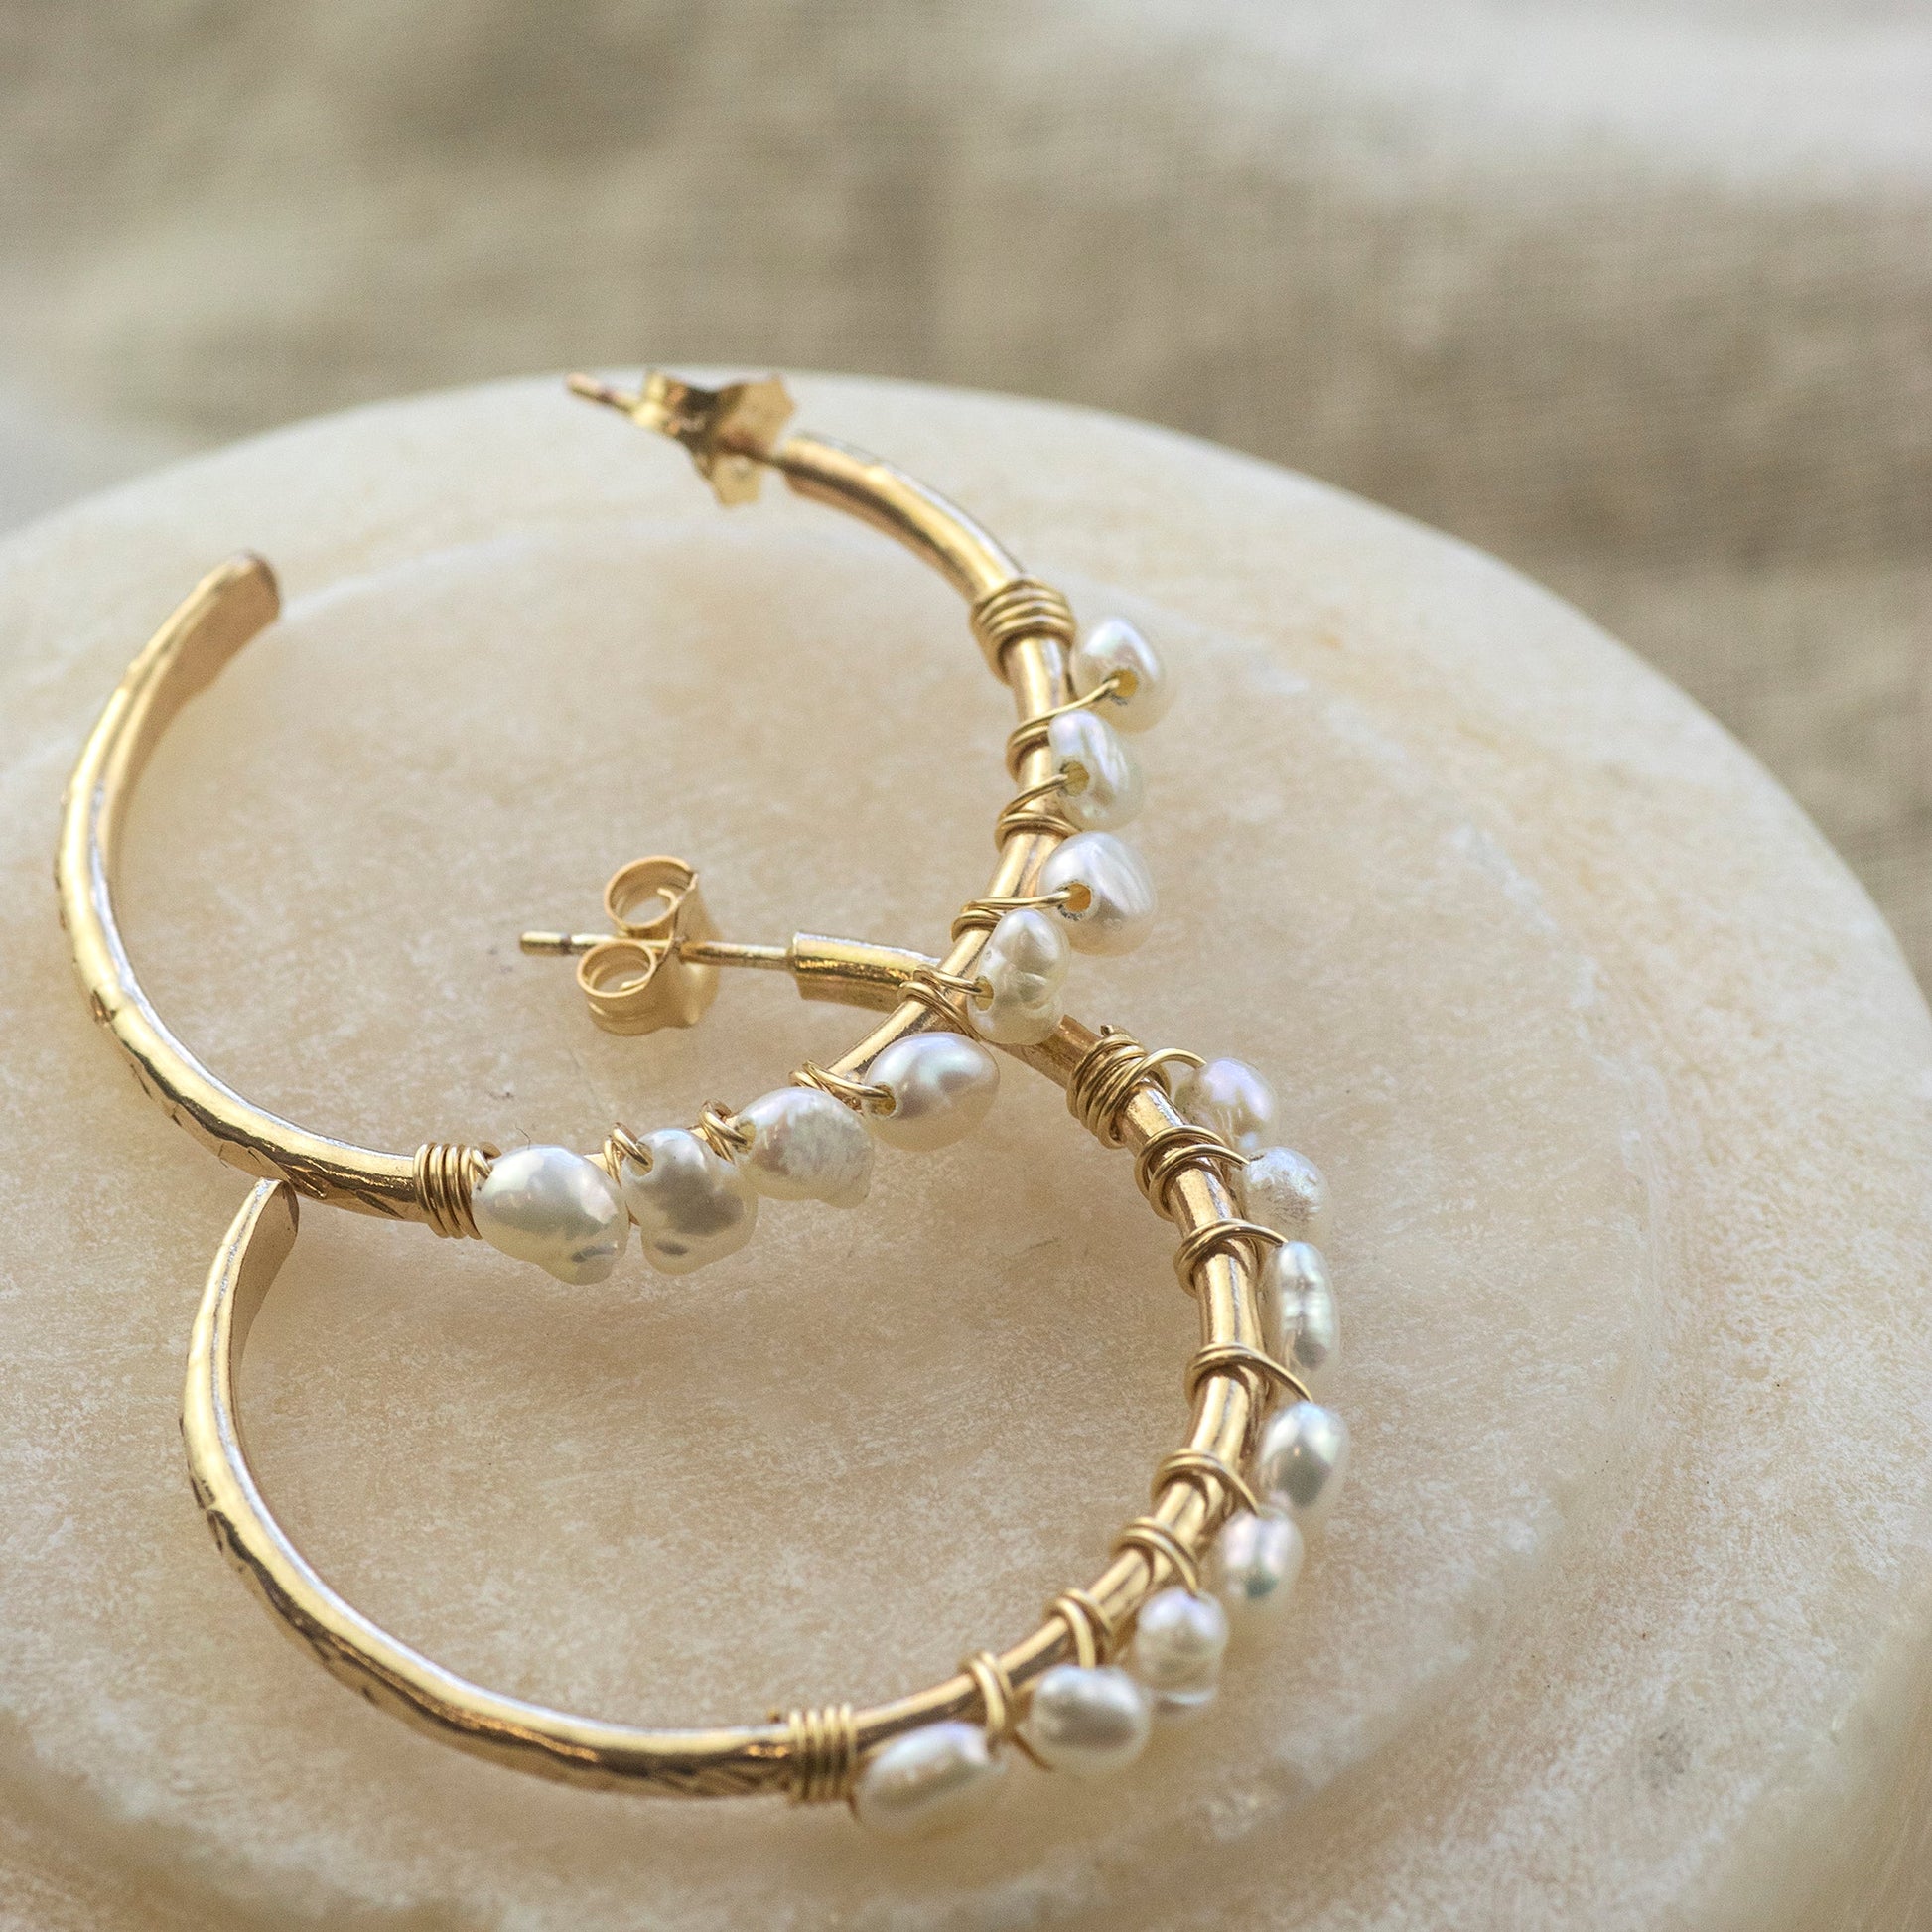 End of Exams Gift - Hoop Earrings Wrapped with Pearls - Silver & Gold